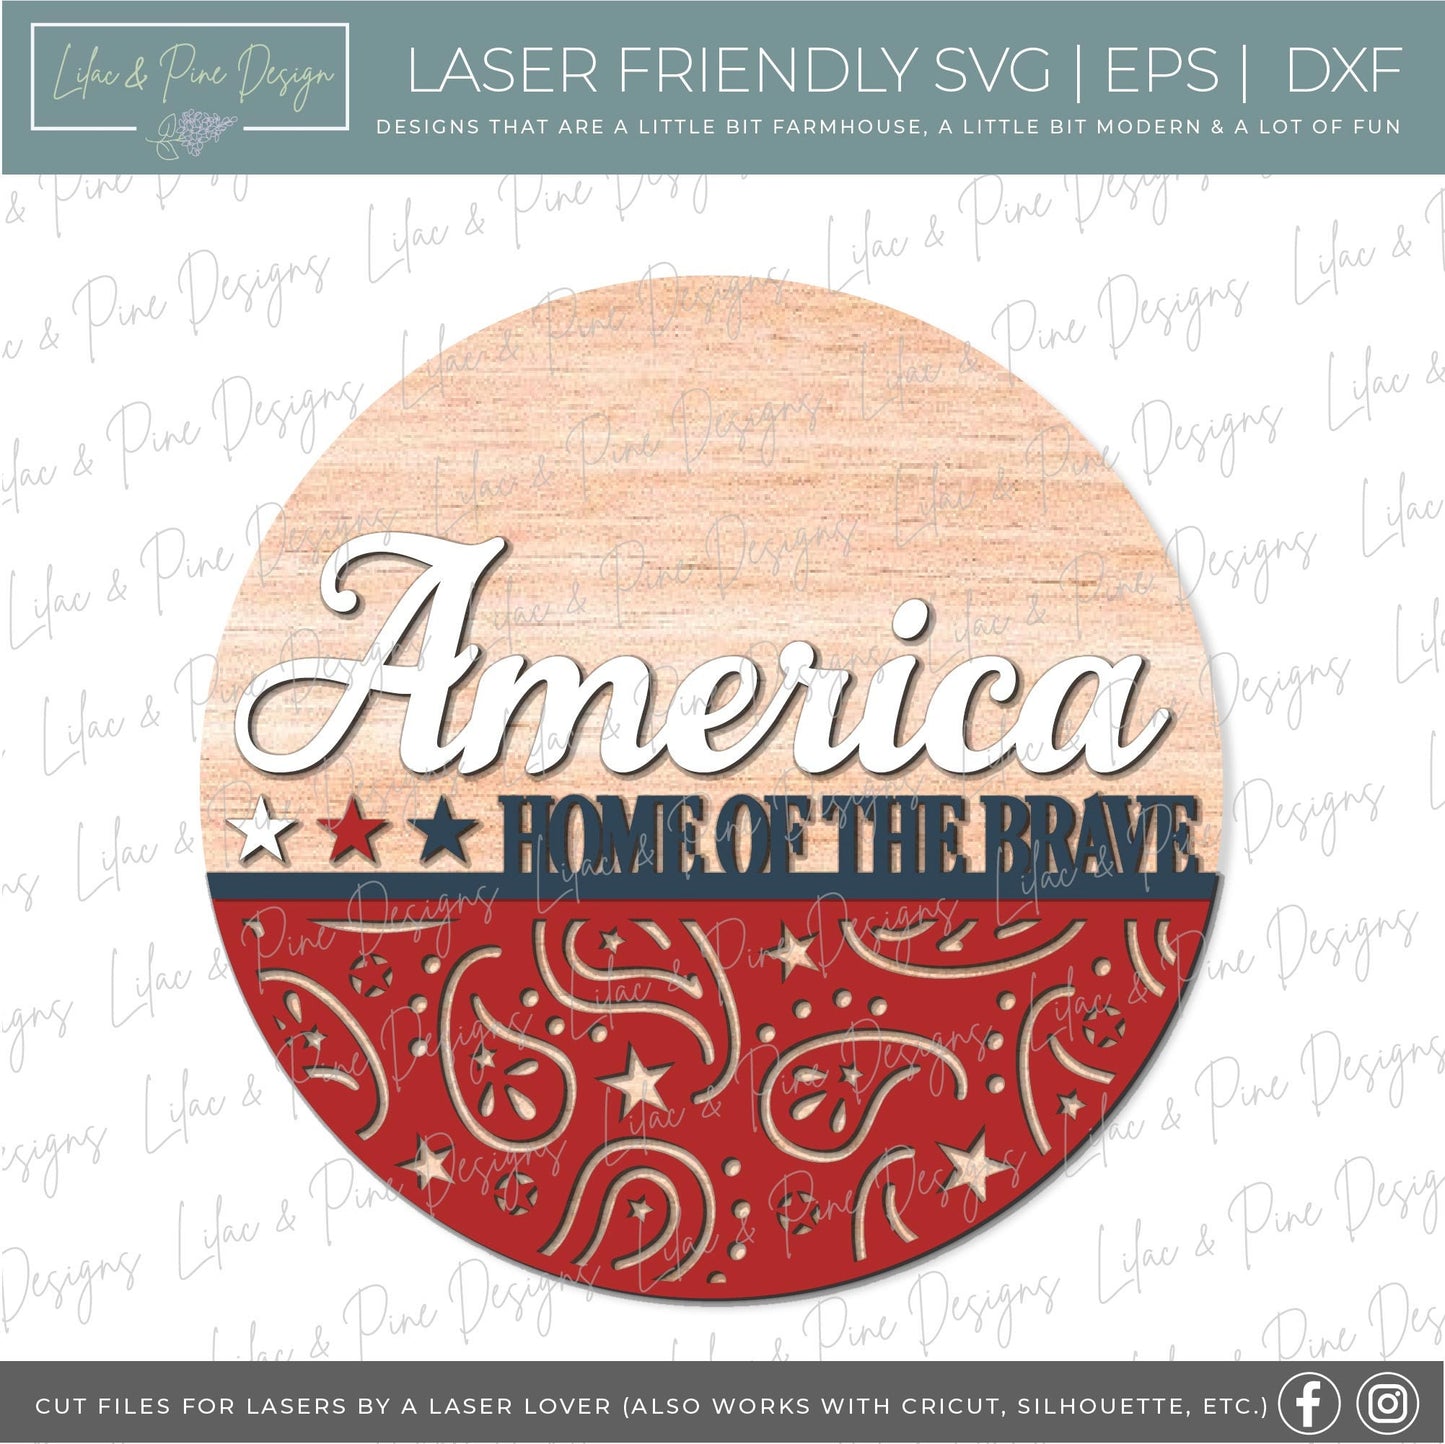 Home of the Brave SVG, 4th of July welcome sign SVG, Fourth of July door hanger, Patriotic round sign, Glowforge SVG, laser cut file